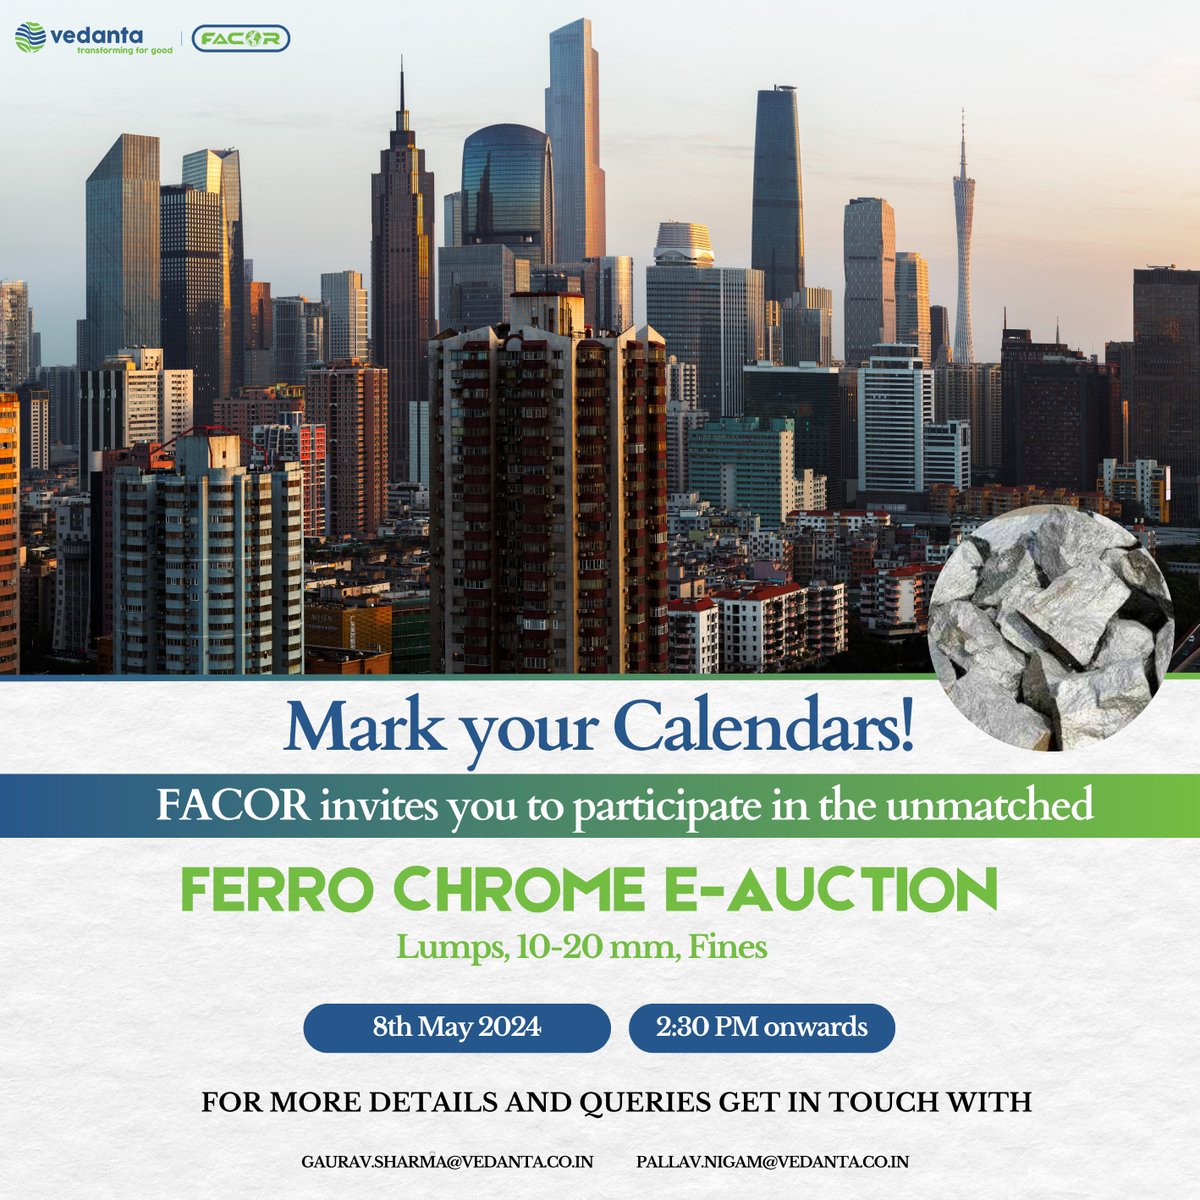 We bring you an E-auction, on 8th May 2024, 2:30 PM onwards. Ferro Alloys Corporation (FACOR) is one of the most reputed producers of High-Carbon Ferro Chrome.  

For queries, contact: Gaurav.Sharma@vedanta.co.in
Pallav.Nigam@vedanta.co.in
#ferrochrome #Vedanta #auction